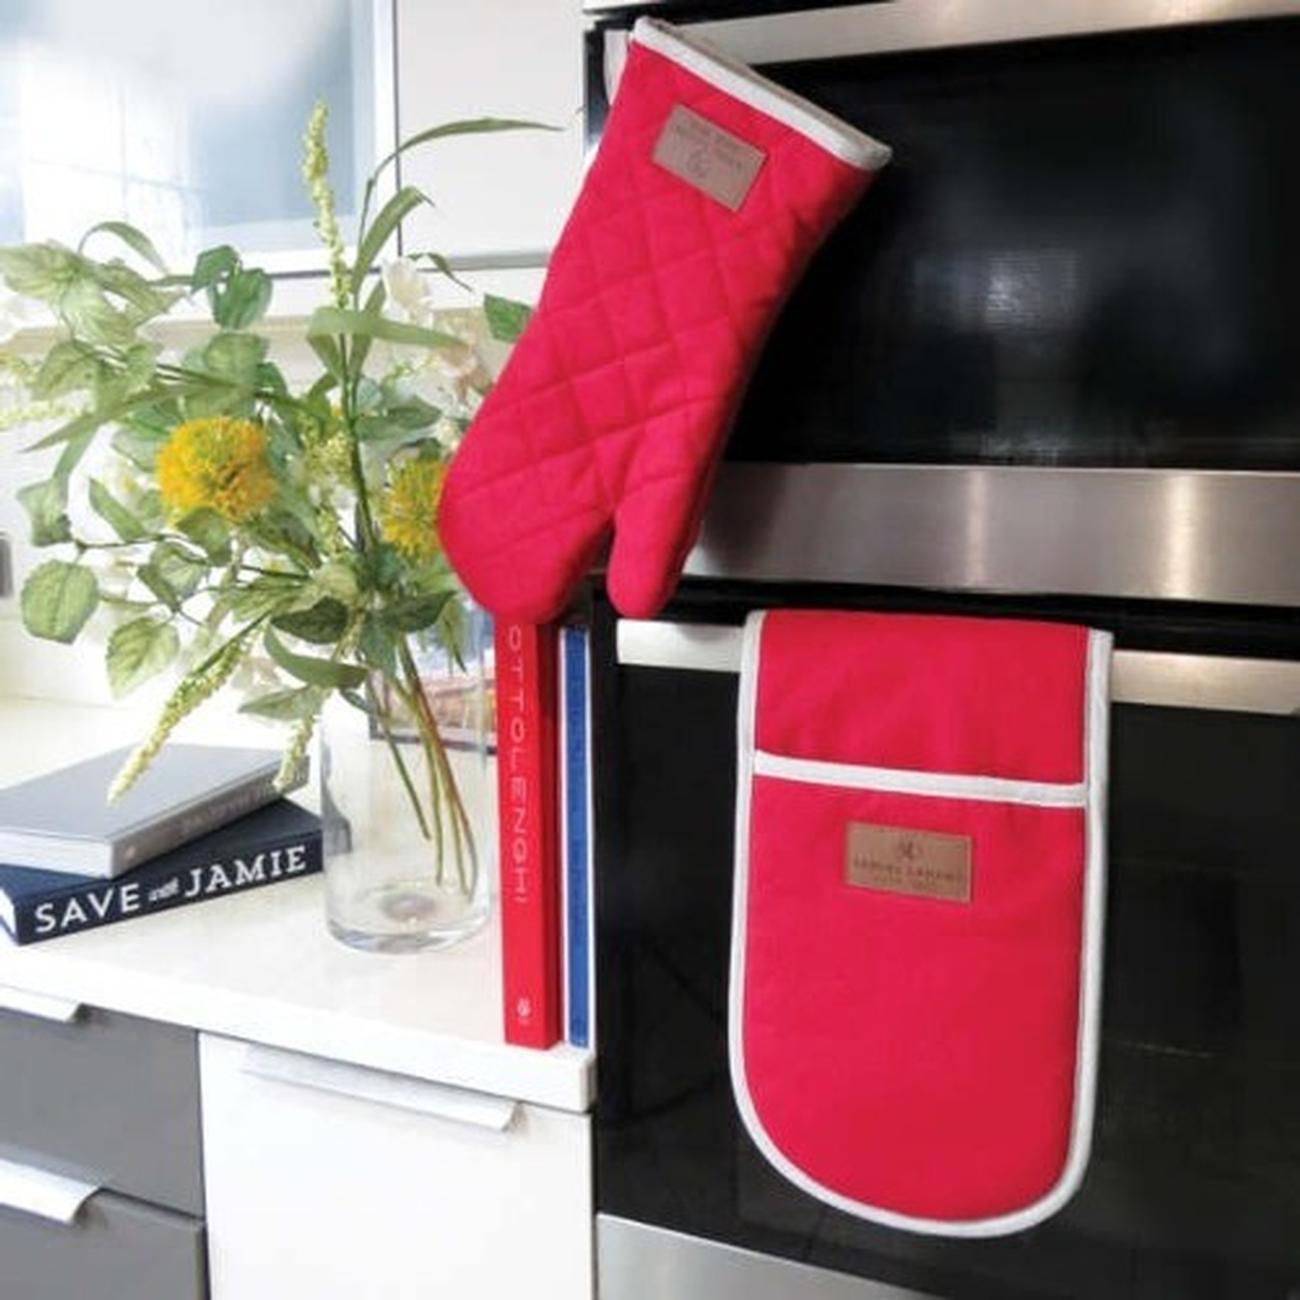 samuel-lamont-canvas-ovenglove-red - Samuel Lamont Canvas Oven Glove-Red